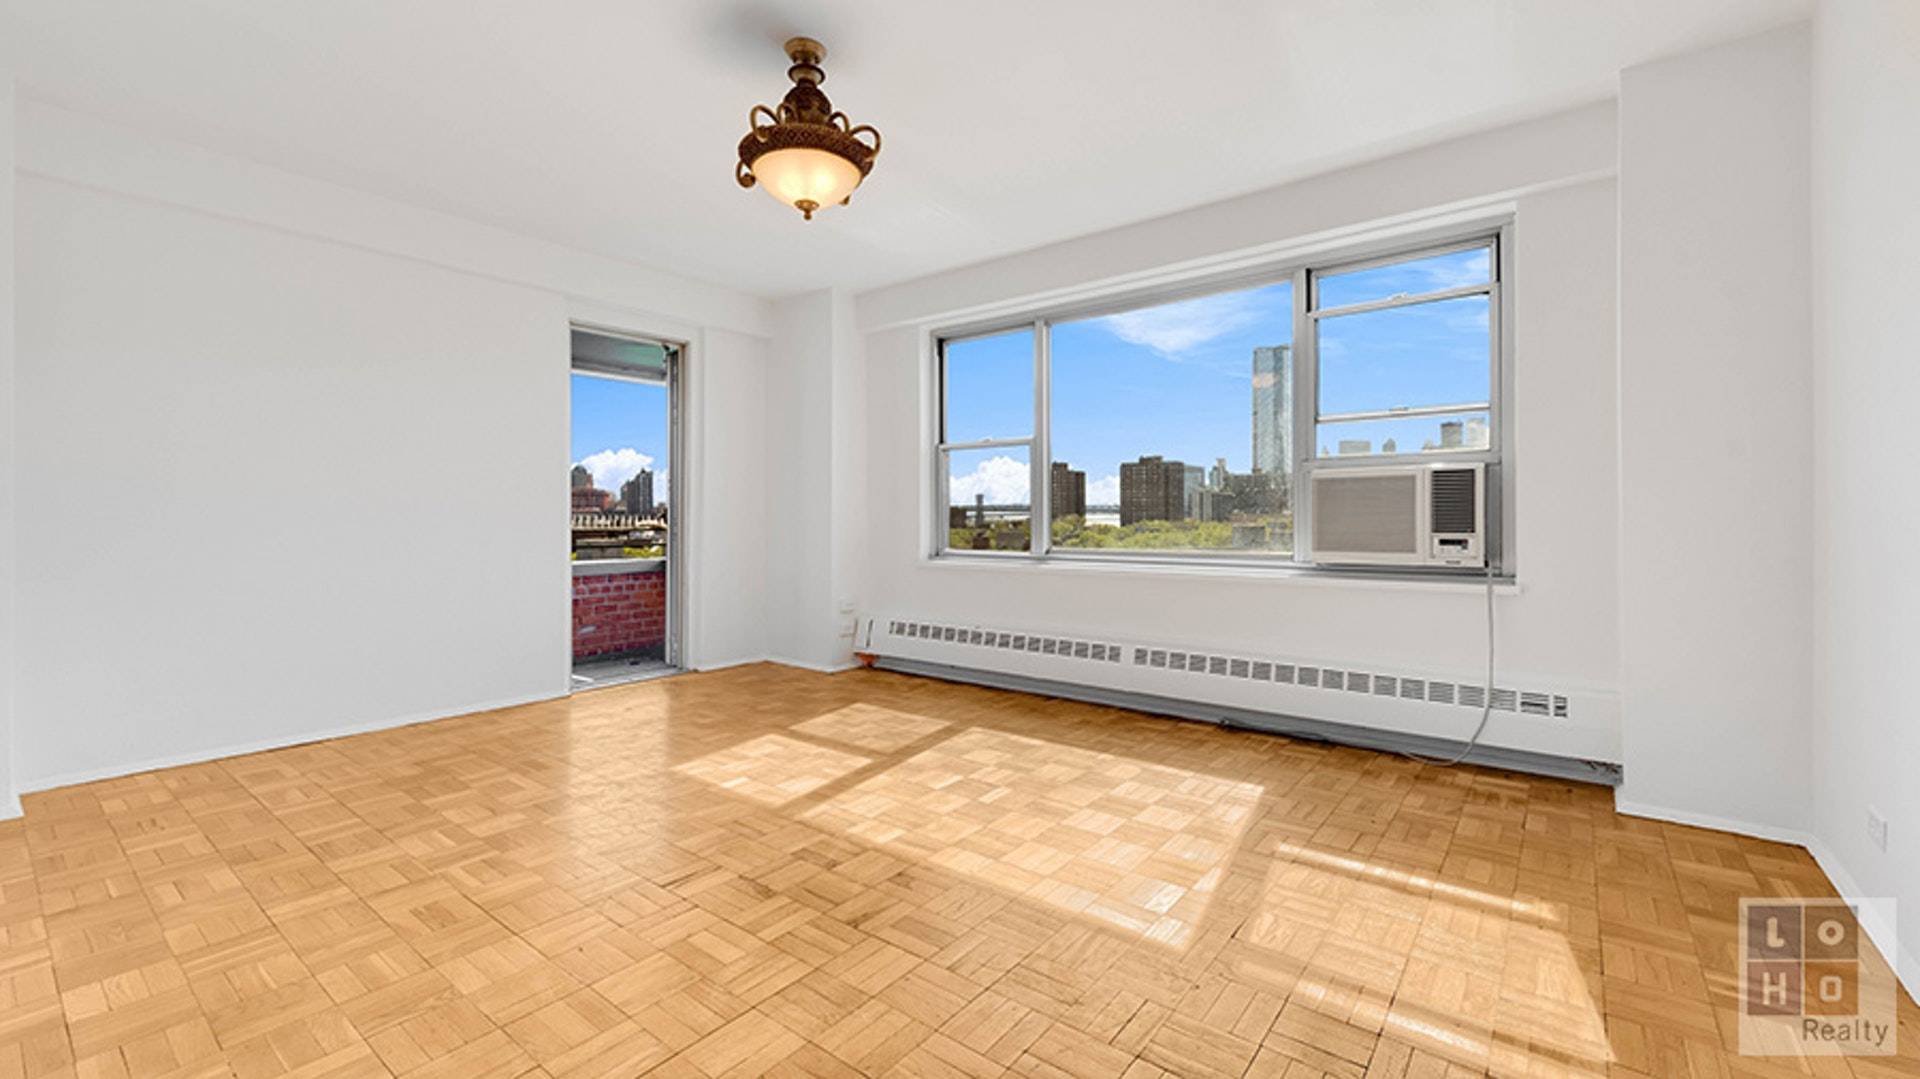 Sunny amp ; bright 2 bedroom with balcony apartment with views of the downtown skyline, featuring peaks of the Manhattan amp ; Brooklyn Bridges, and the Freedom Tower !